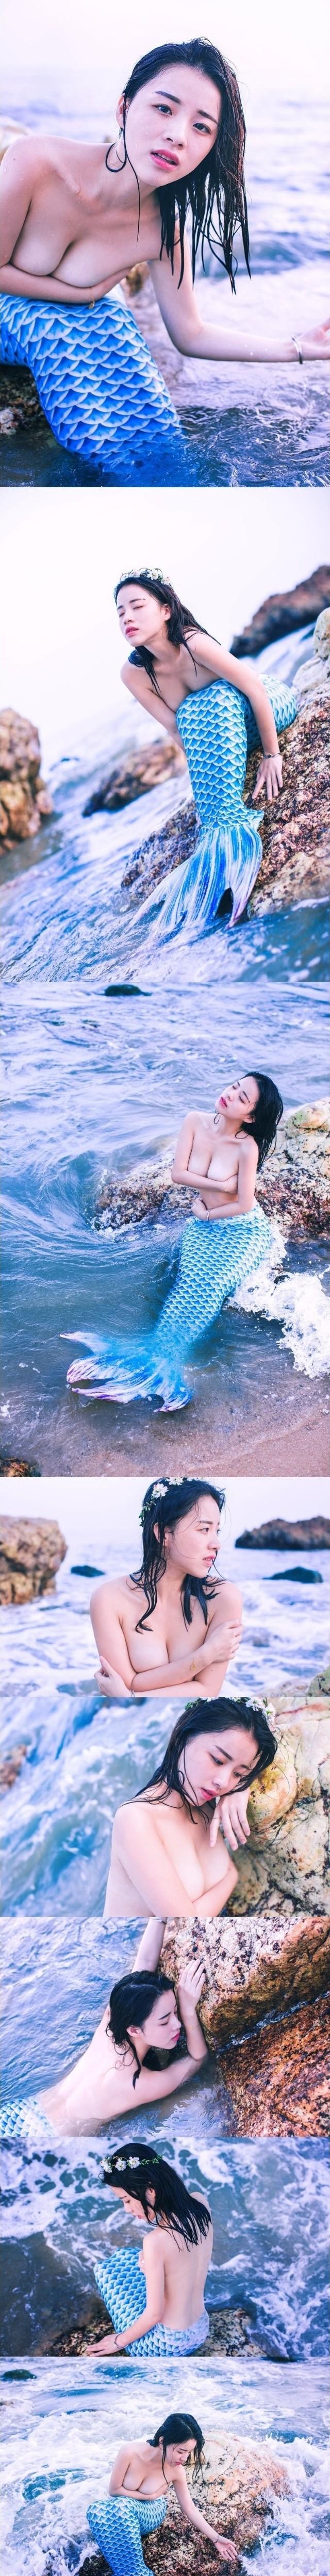 A mermaid costume play with a no bra.